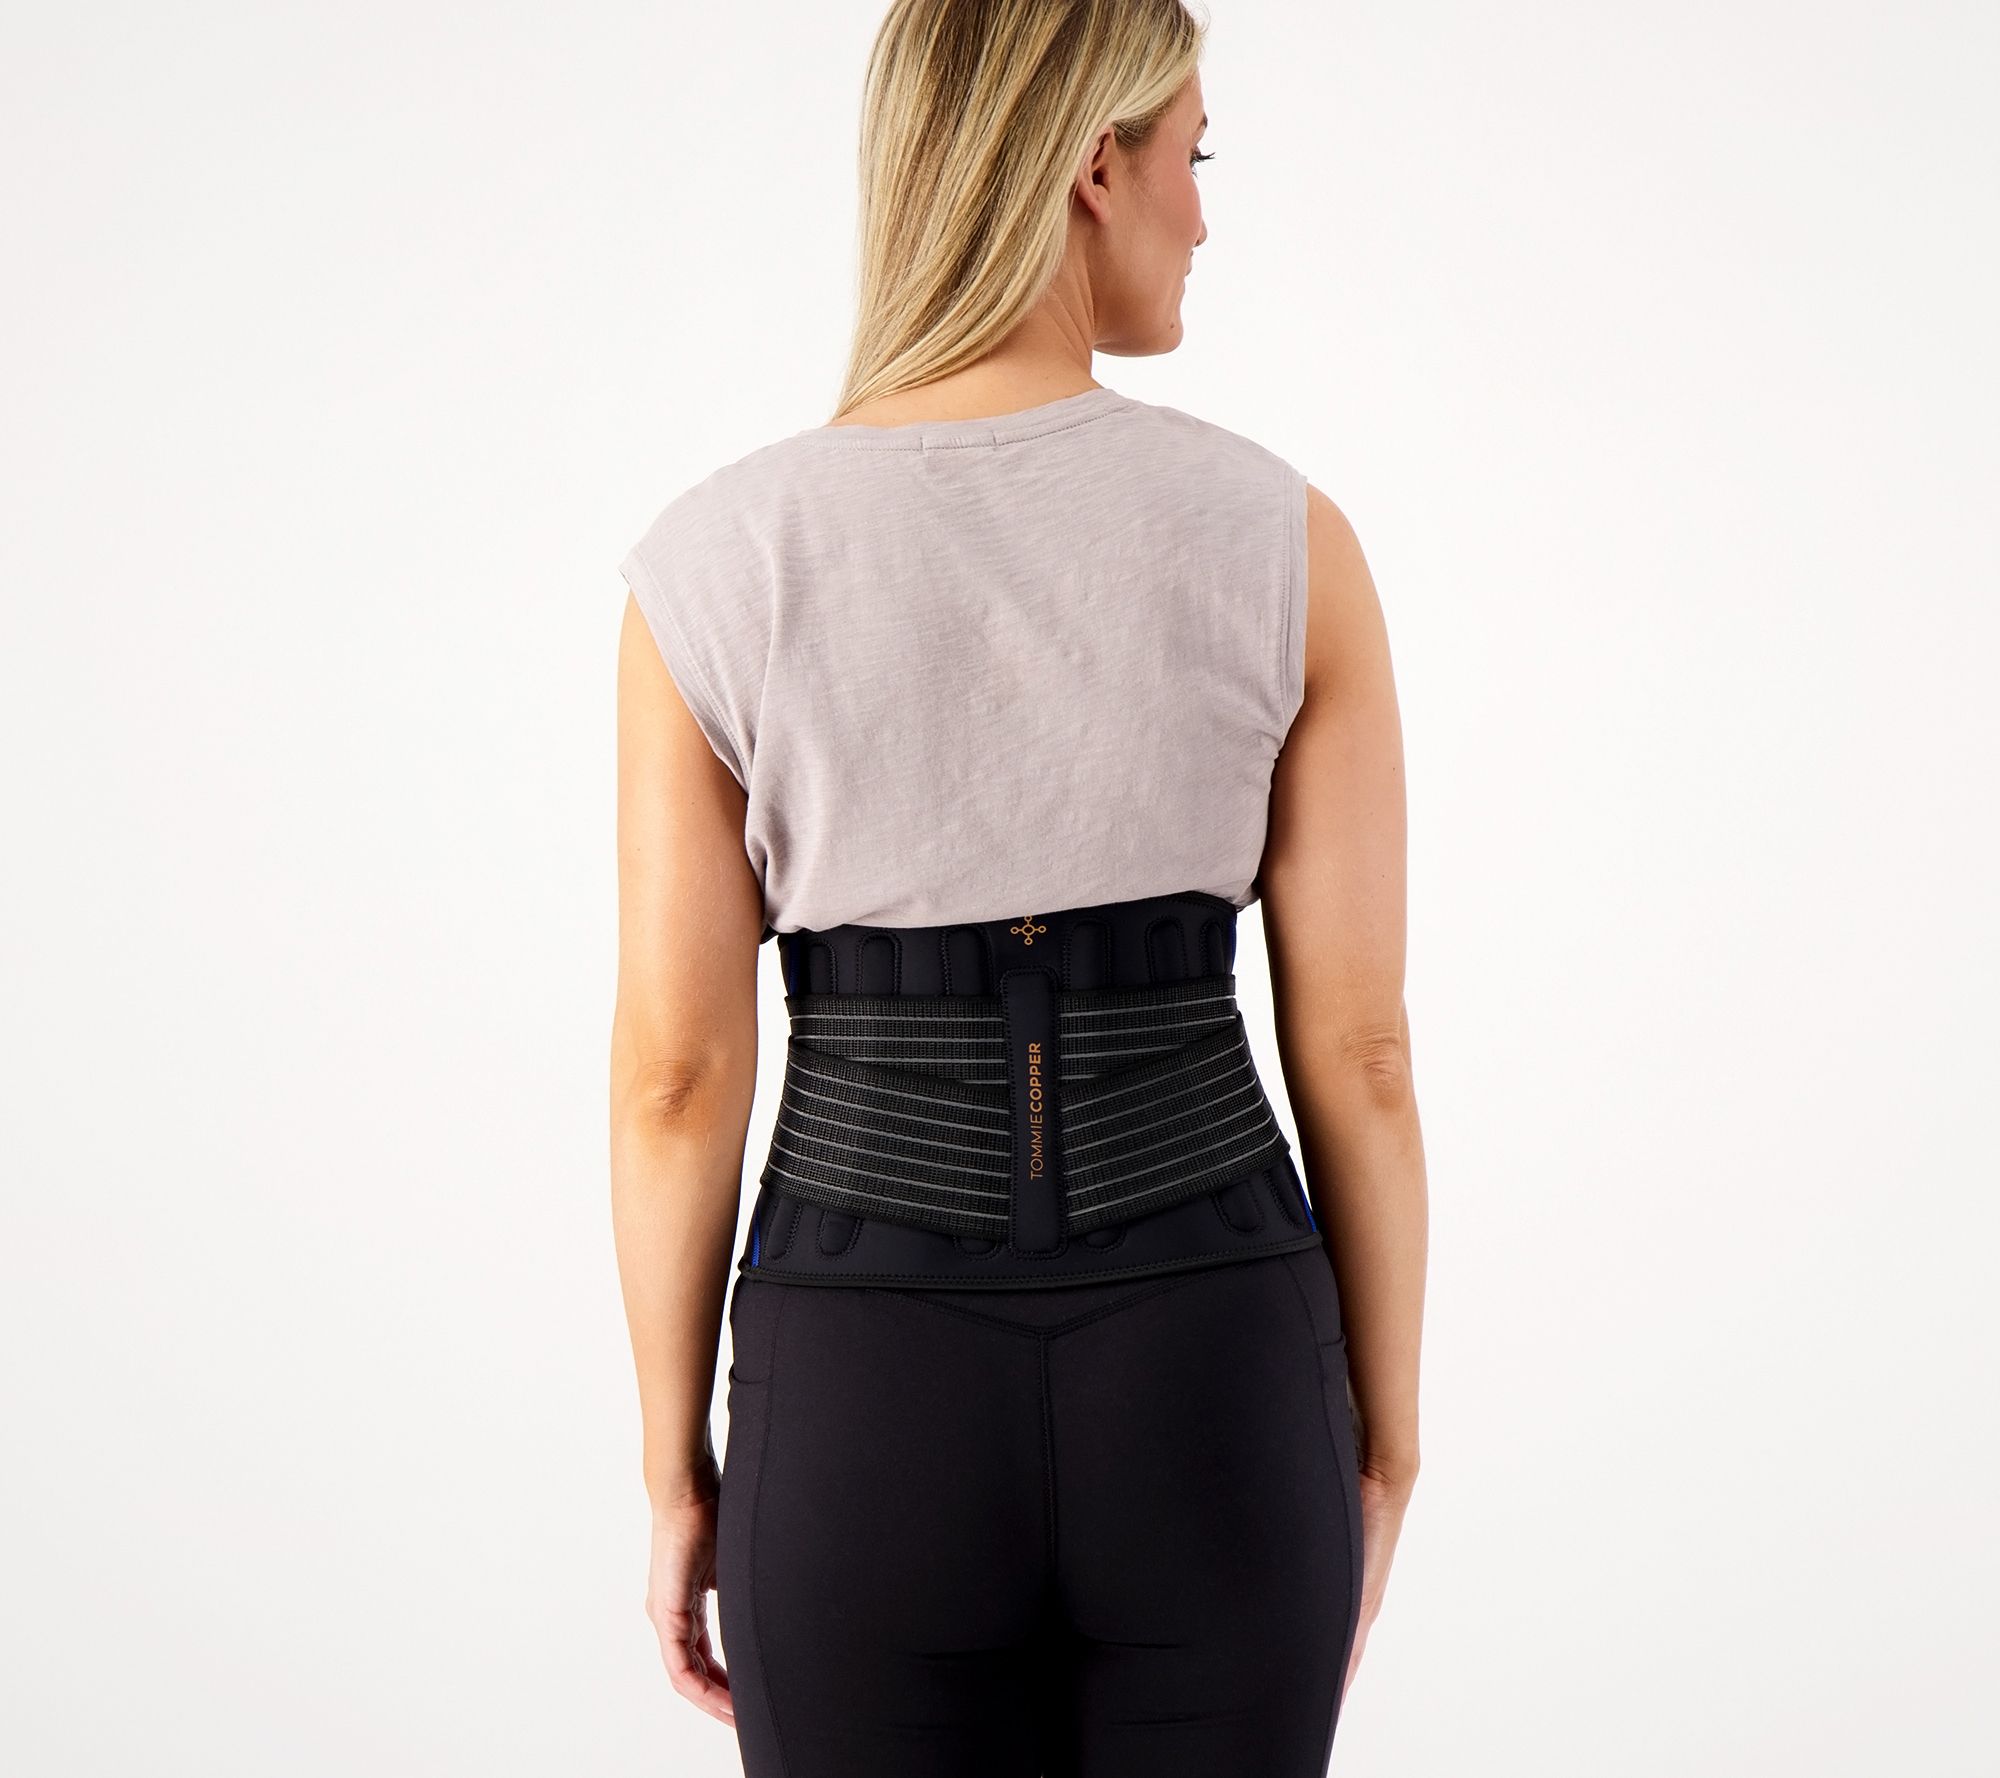 Tommie Copper Women's Lower Back Support Tank on QVC 